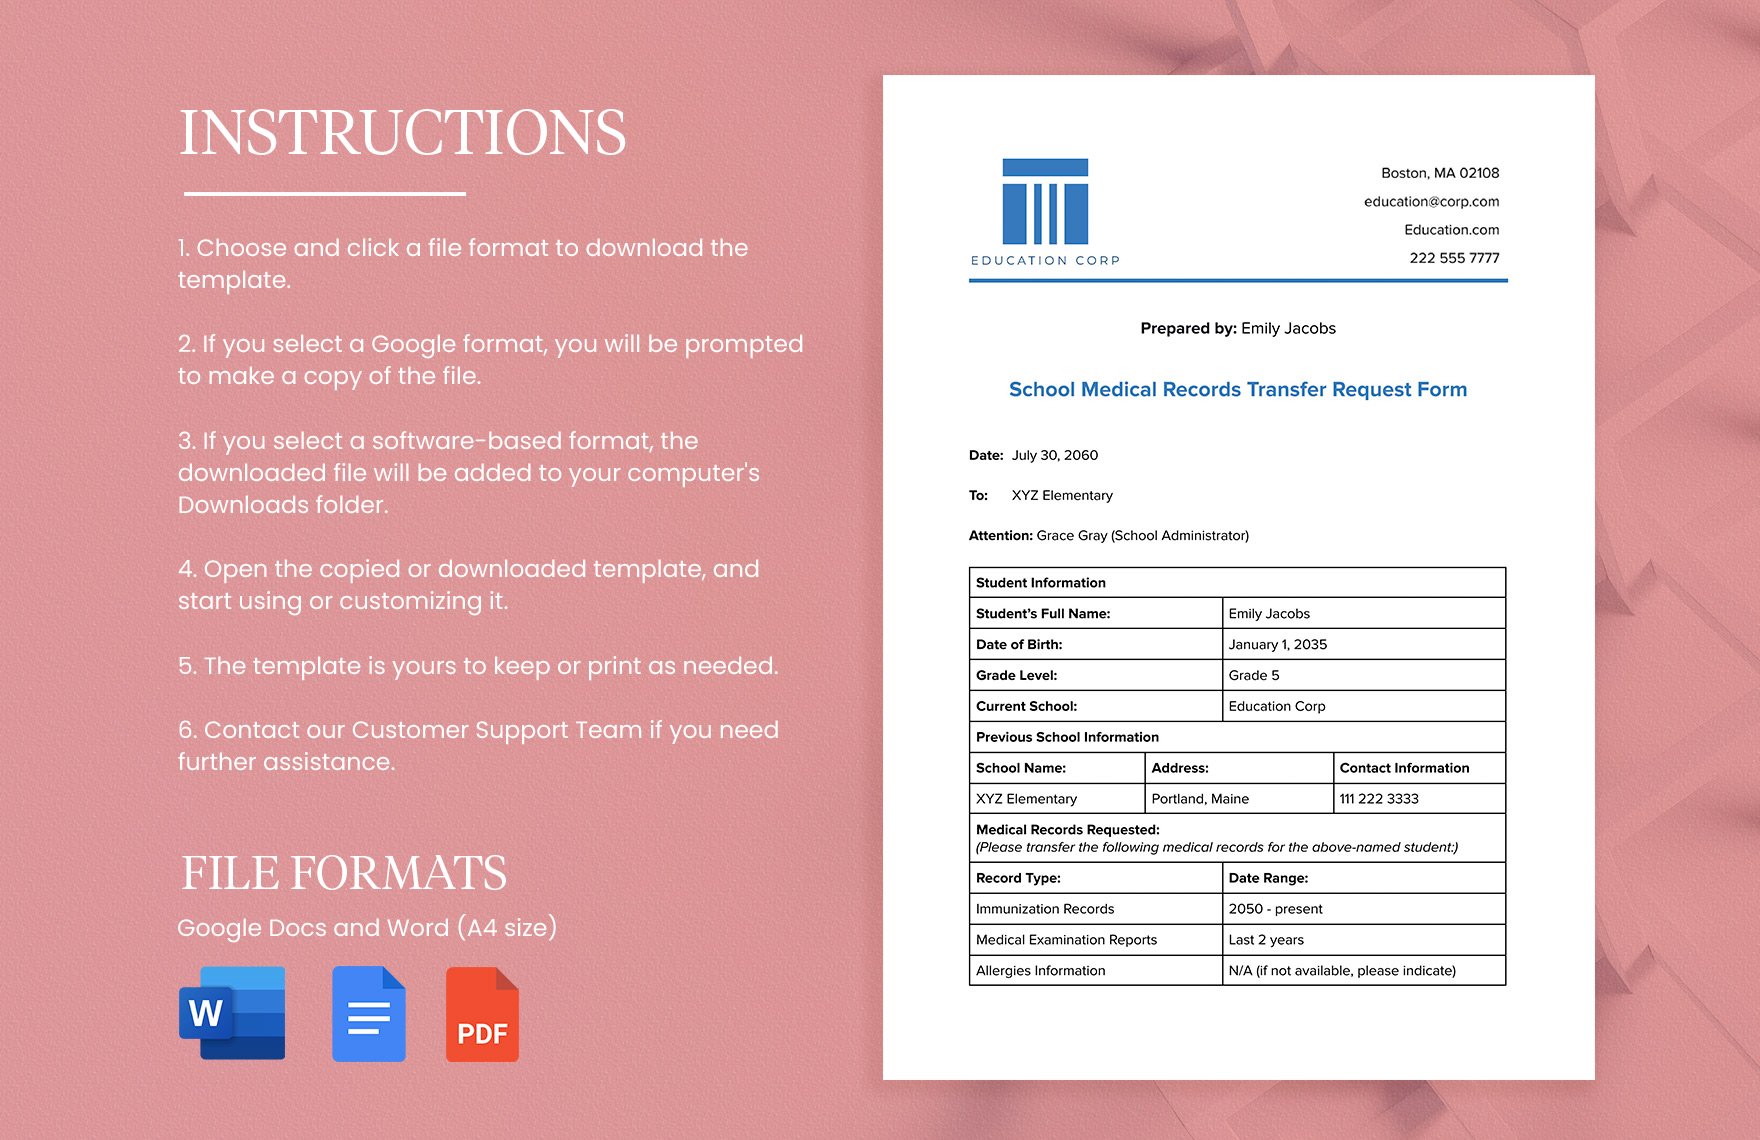 School Medical Records Transfer Request Form Template